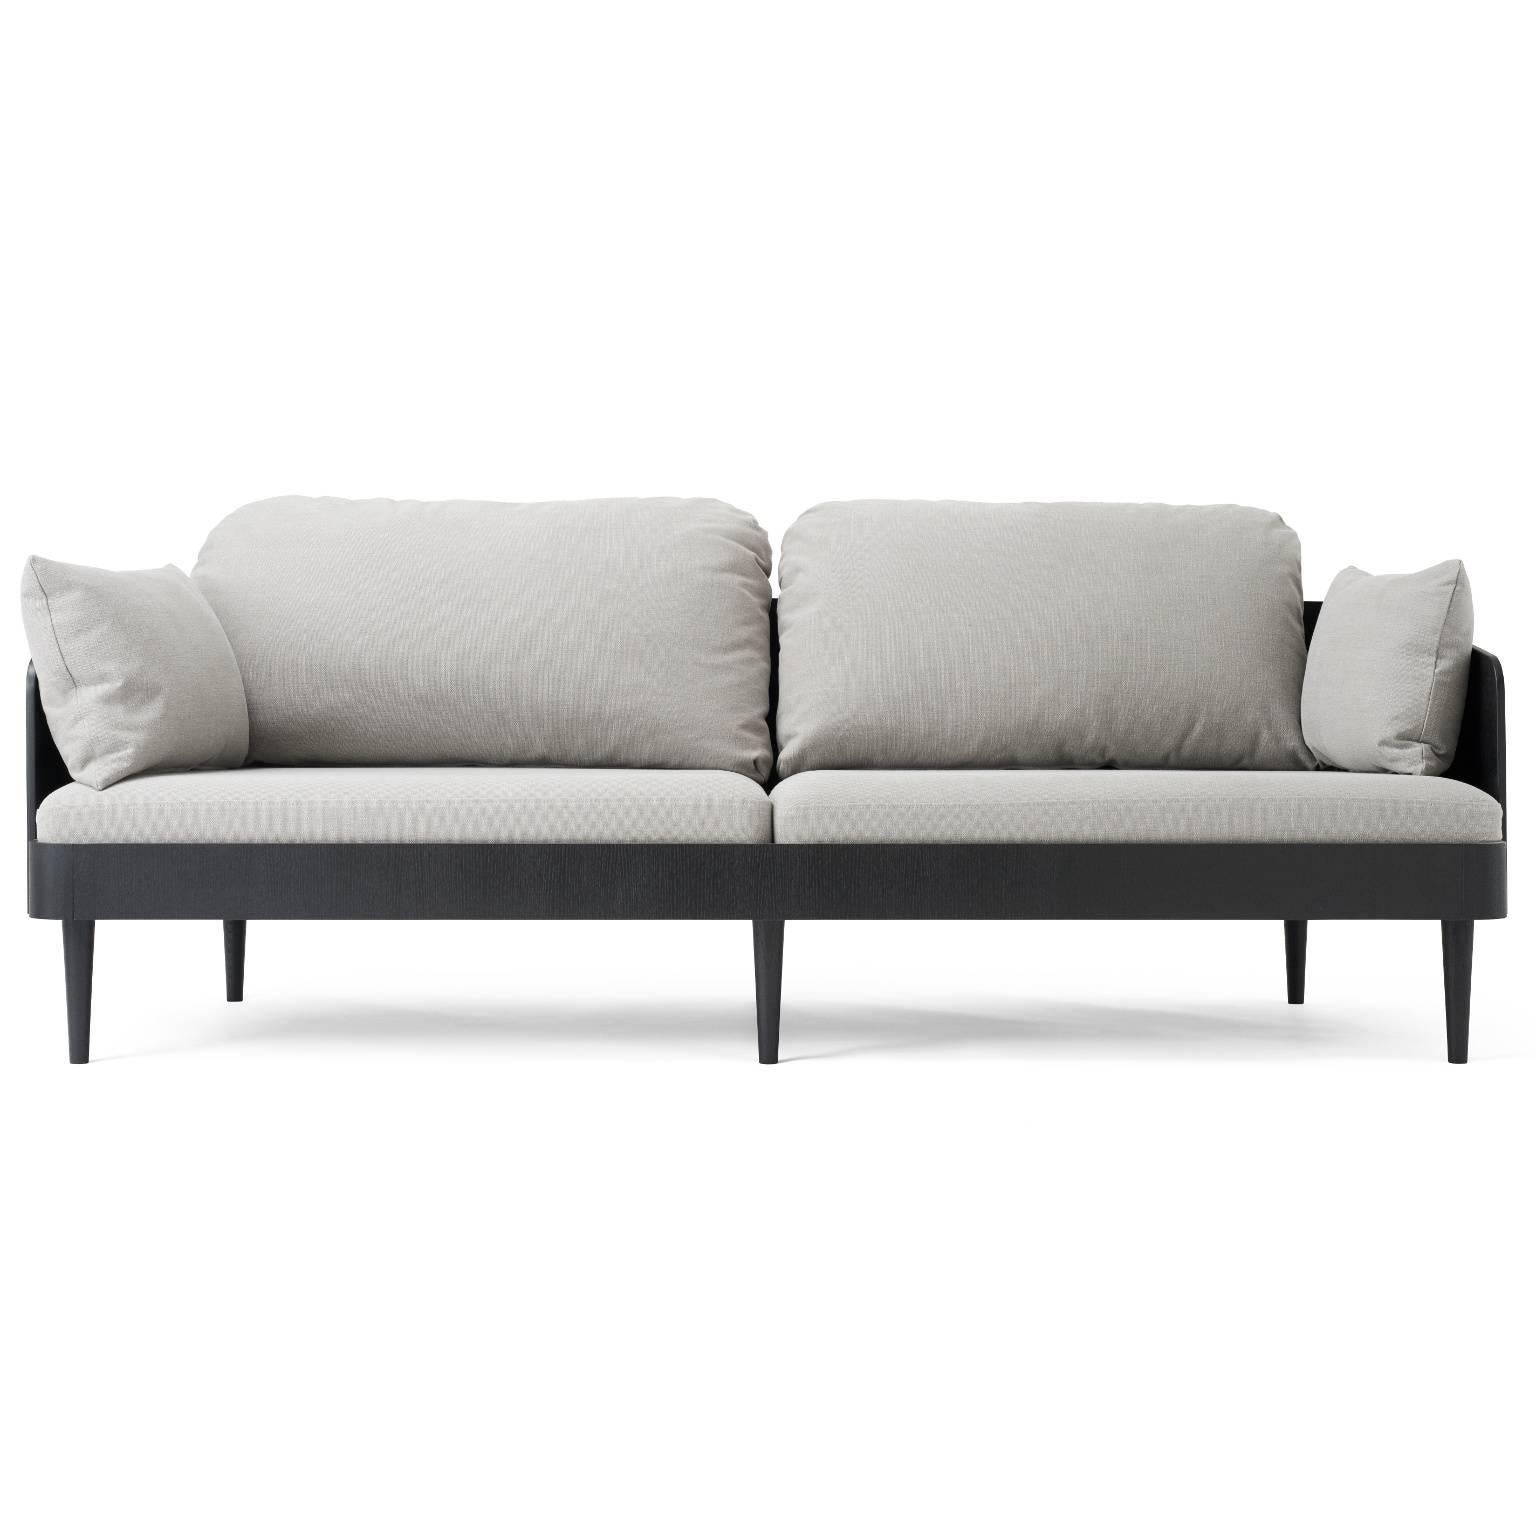 The Septembre series solves an age-old conundrum of sofa design: while fully-upholstered sofas are comfortable, they often look boxy and inelegant. More structured sofas are aesthetically pleasing yet are seldom made for relaxation. The Septembre